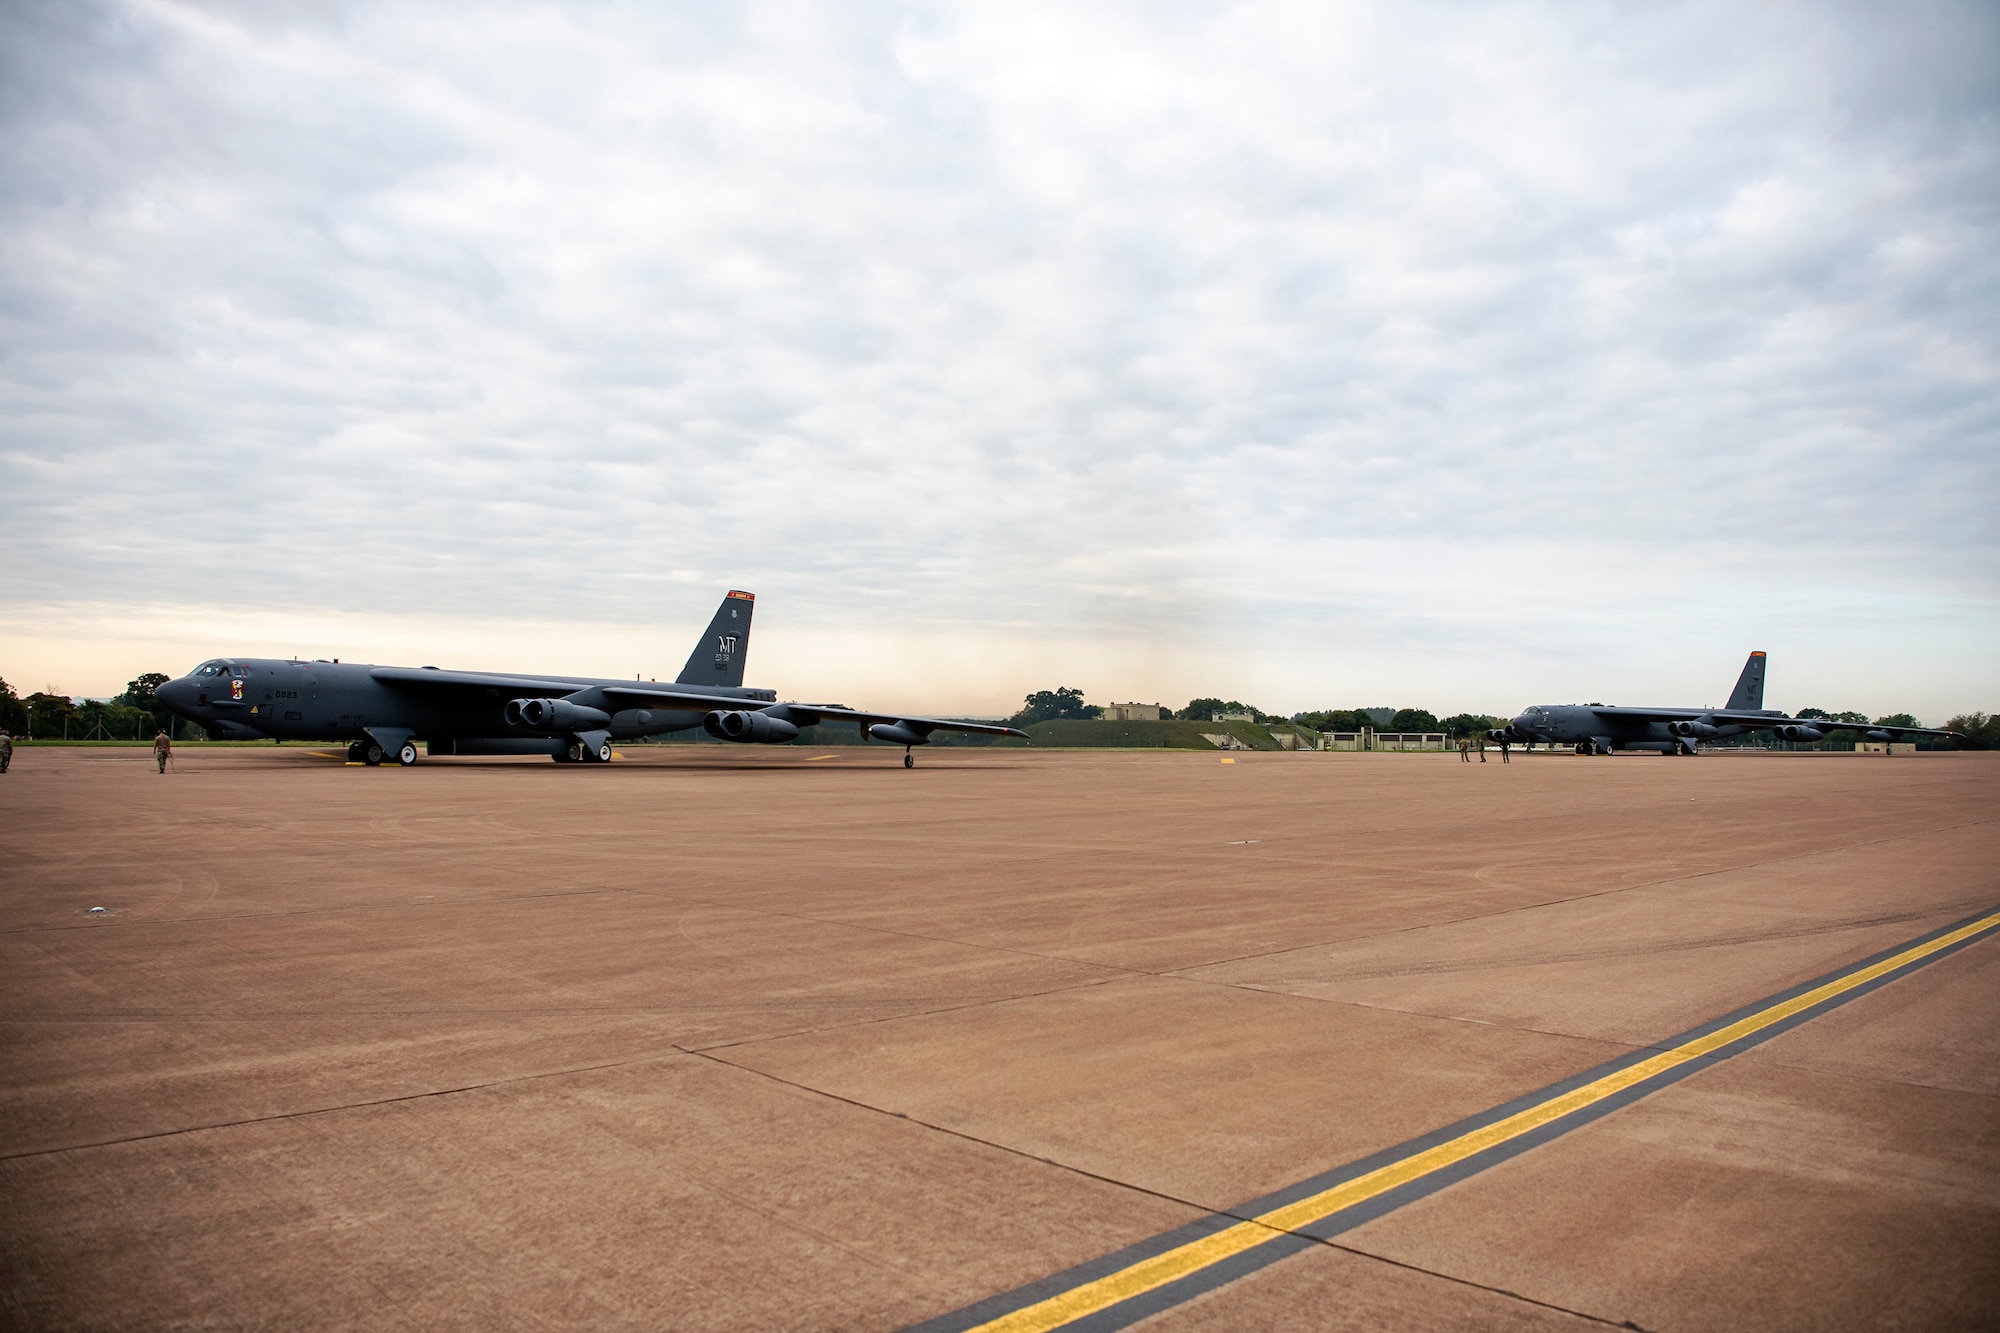 B-52 Stratofortress aircraft assigned to the 23rd Expeditionary Bomb Squadron que on the flightline prior to takeoff at RAF Fairford, United Kingdom, Sept. 21, 2022. A Bomber Task Force is the global employment of U.S. strategice bombers, providing strategic military advantage to achehive national and combatant commander objectives. (U.S. Air Force photo by Staff Sgt. Eugene Oliver)